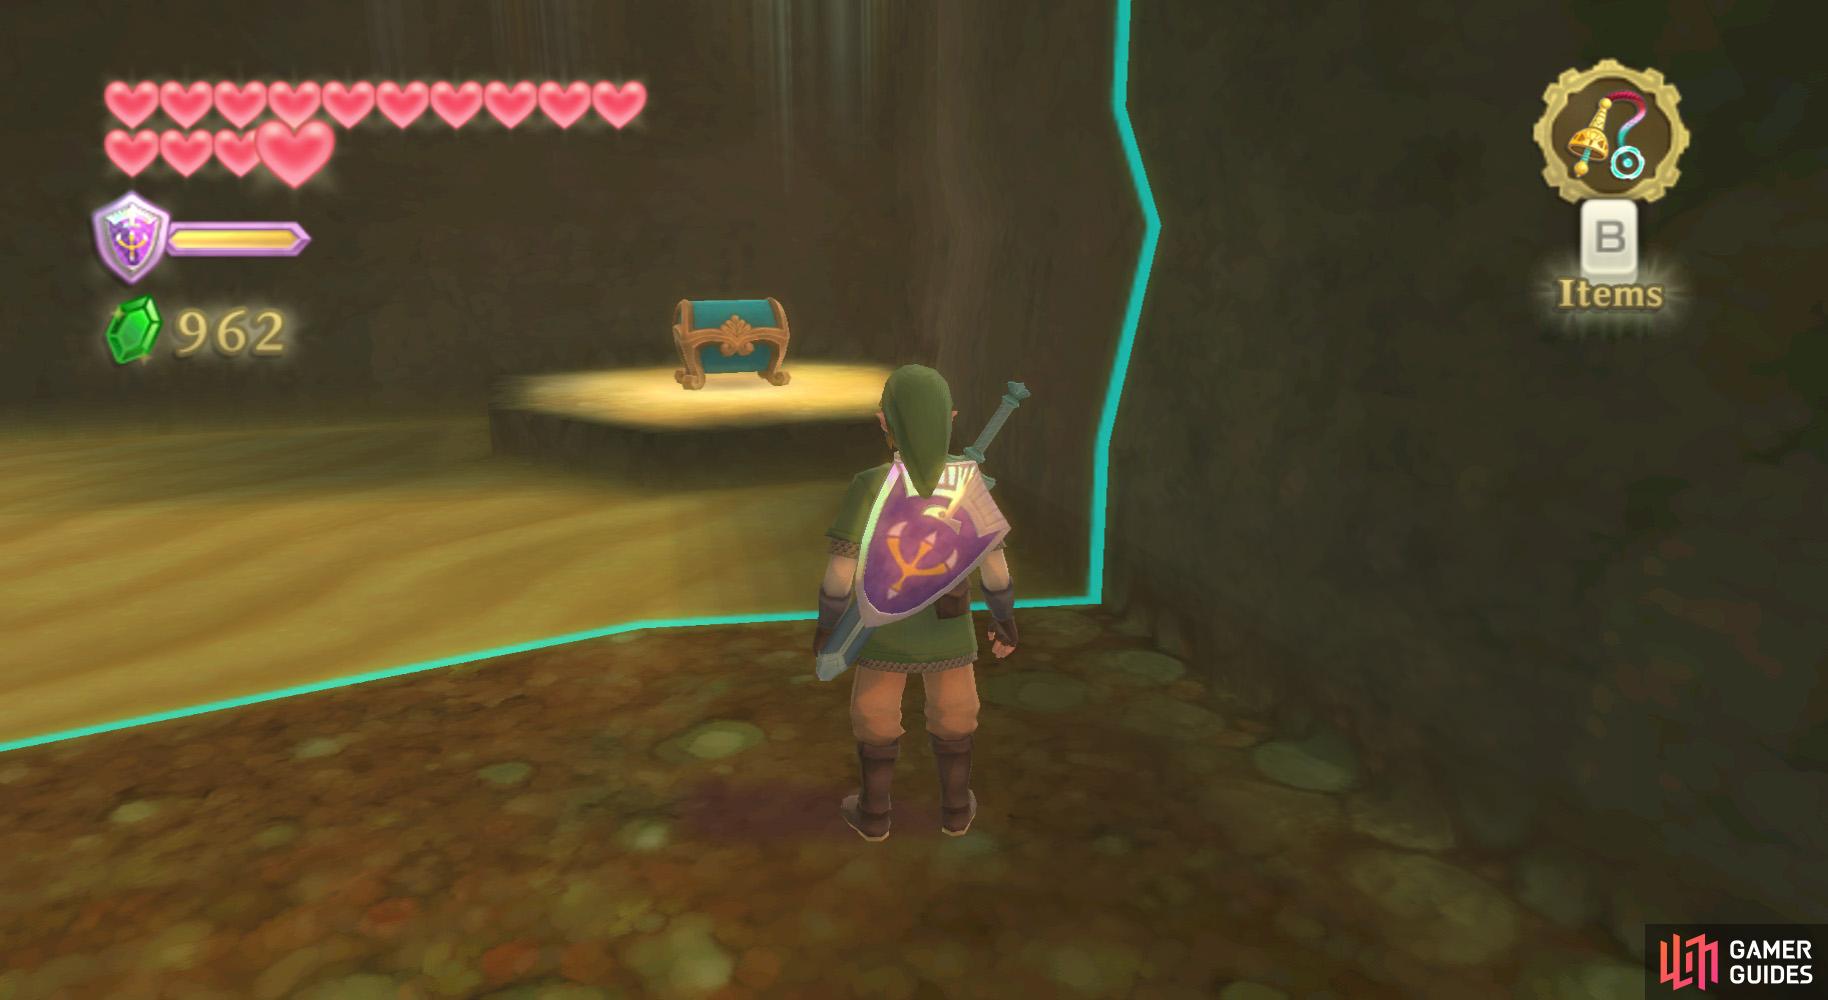 Put down the orb far away from the chest, so the platforms don't rise, but close enough so you can run across.